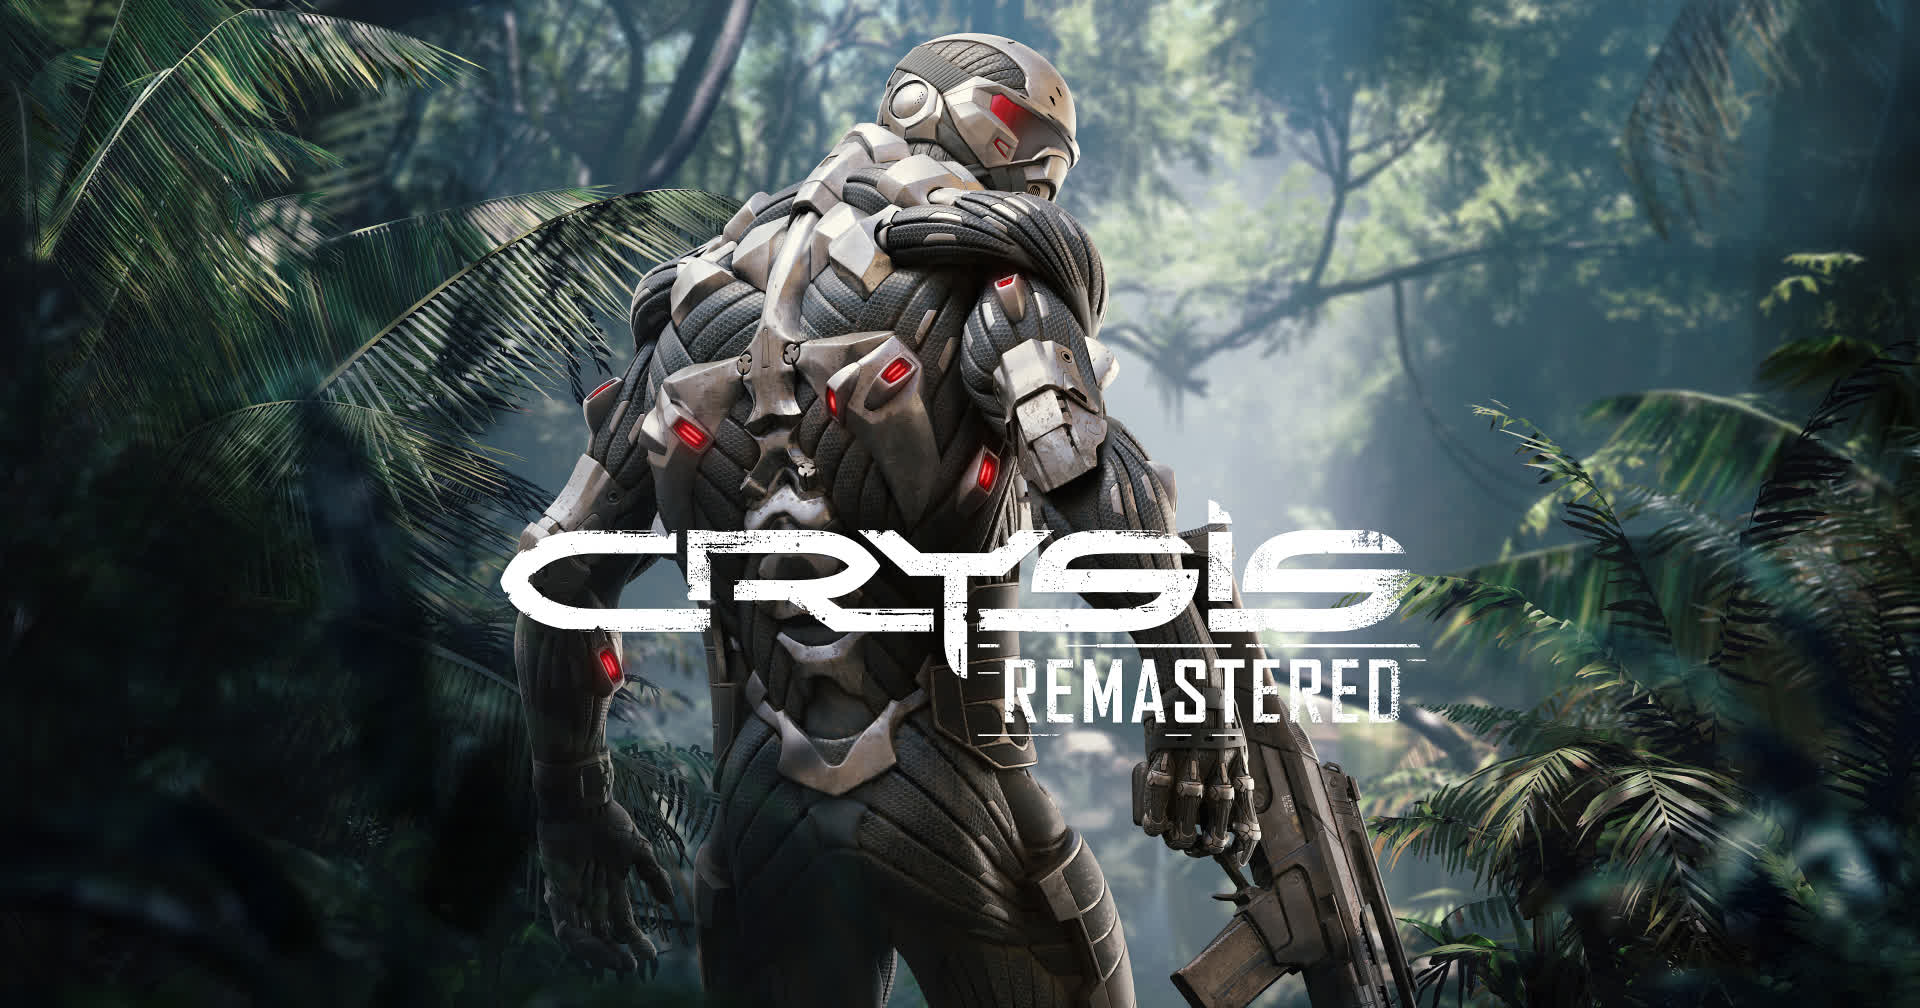 Crysis Remastered patch promises better performance on modern hardware